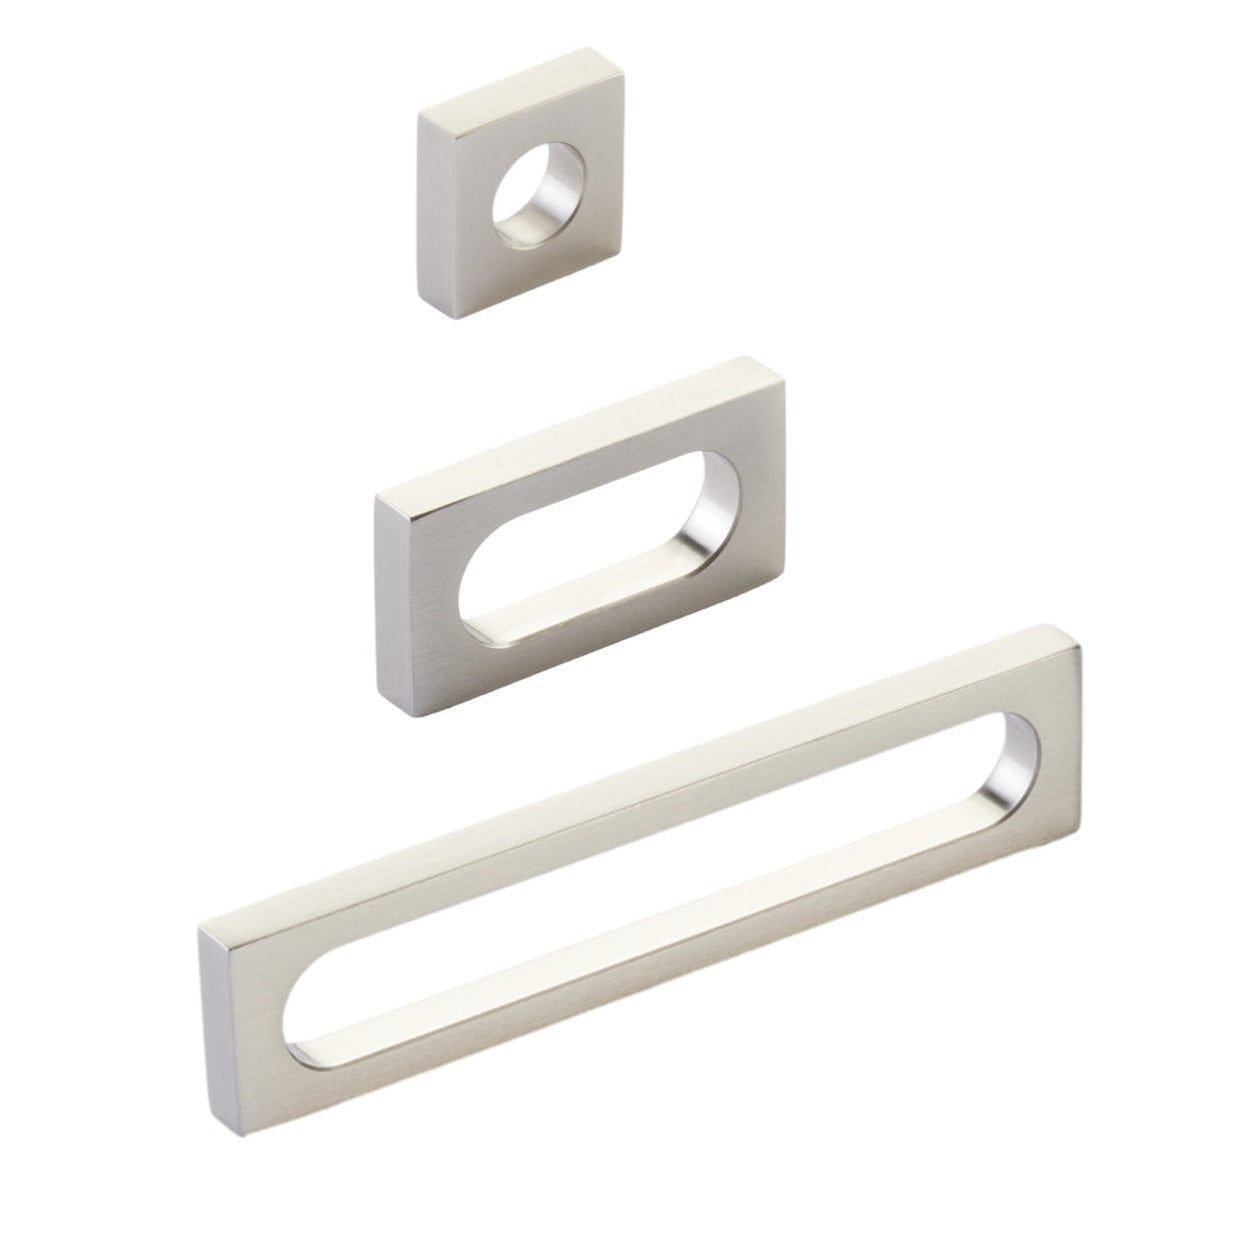 Brushed Nickel "Loop" Square Drawer Pulls and Cabinet Knobs - Industry Hardware